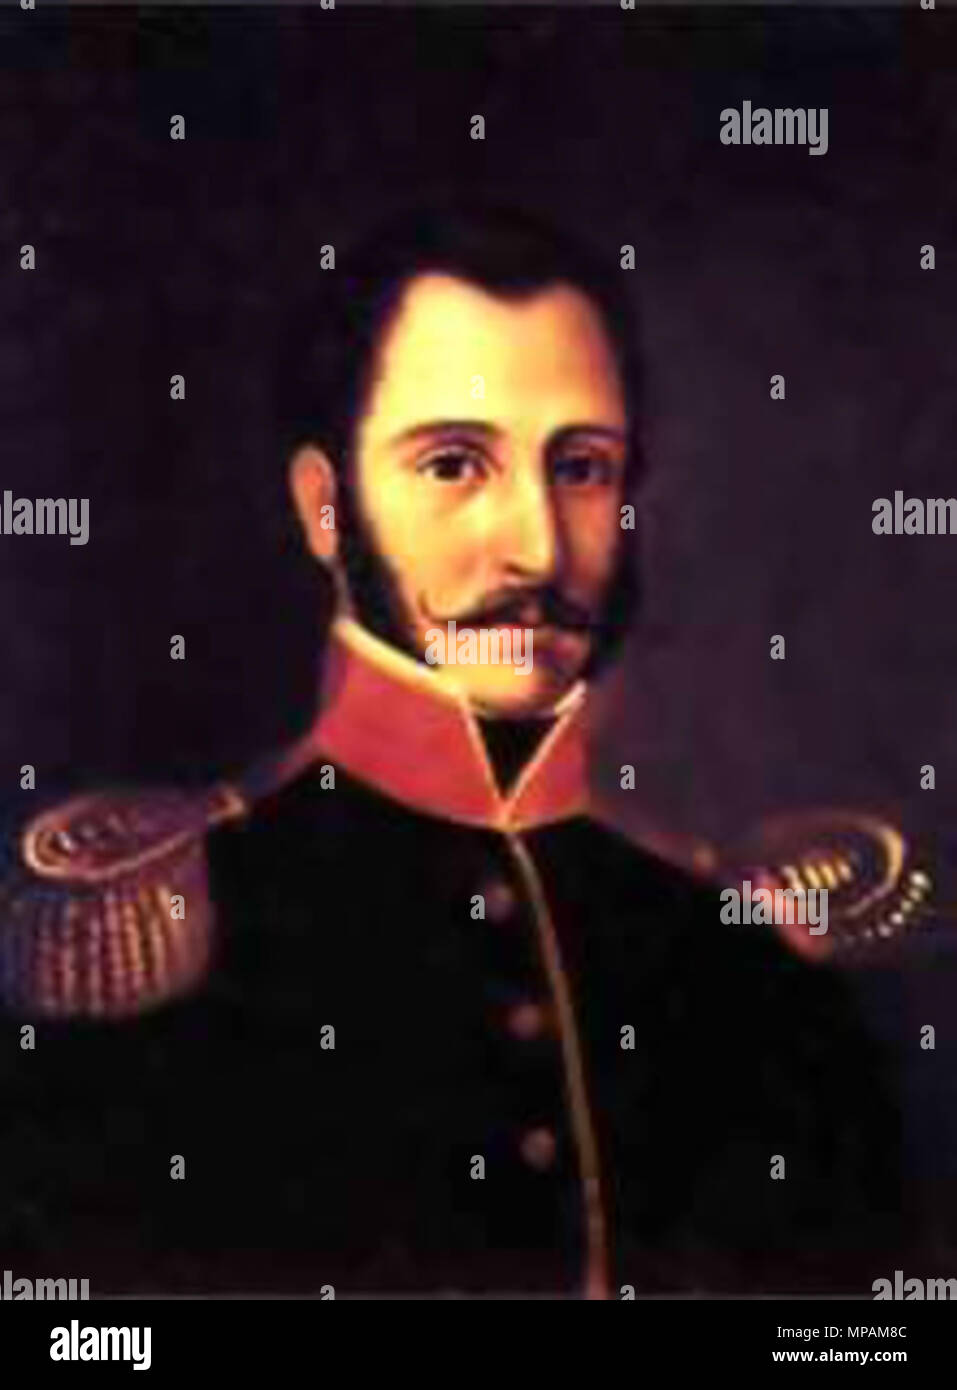 . Oil painting of Líborio Mejía president of the United Provinces of the New Granada (now Colombia) . circa 1880. Franco, Montoya y Rubiano 881 Mejilibo Stock Photo